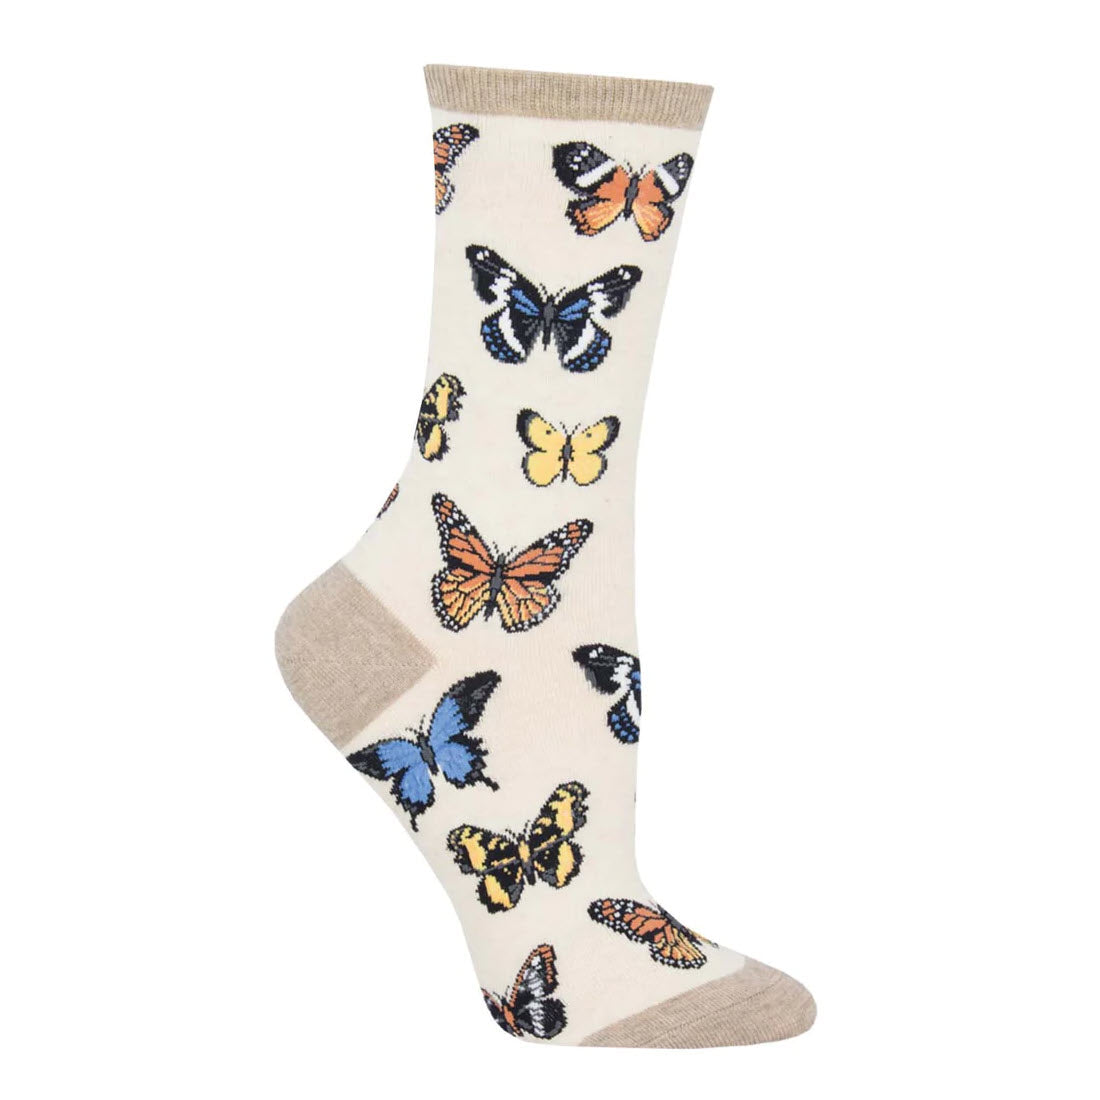 A single ivory crew sock from Socksmith decorated with colorful caterpillar and butterfly patterns, displayed against a white background.